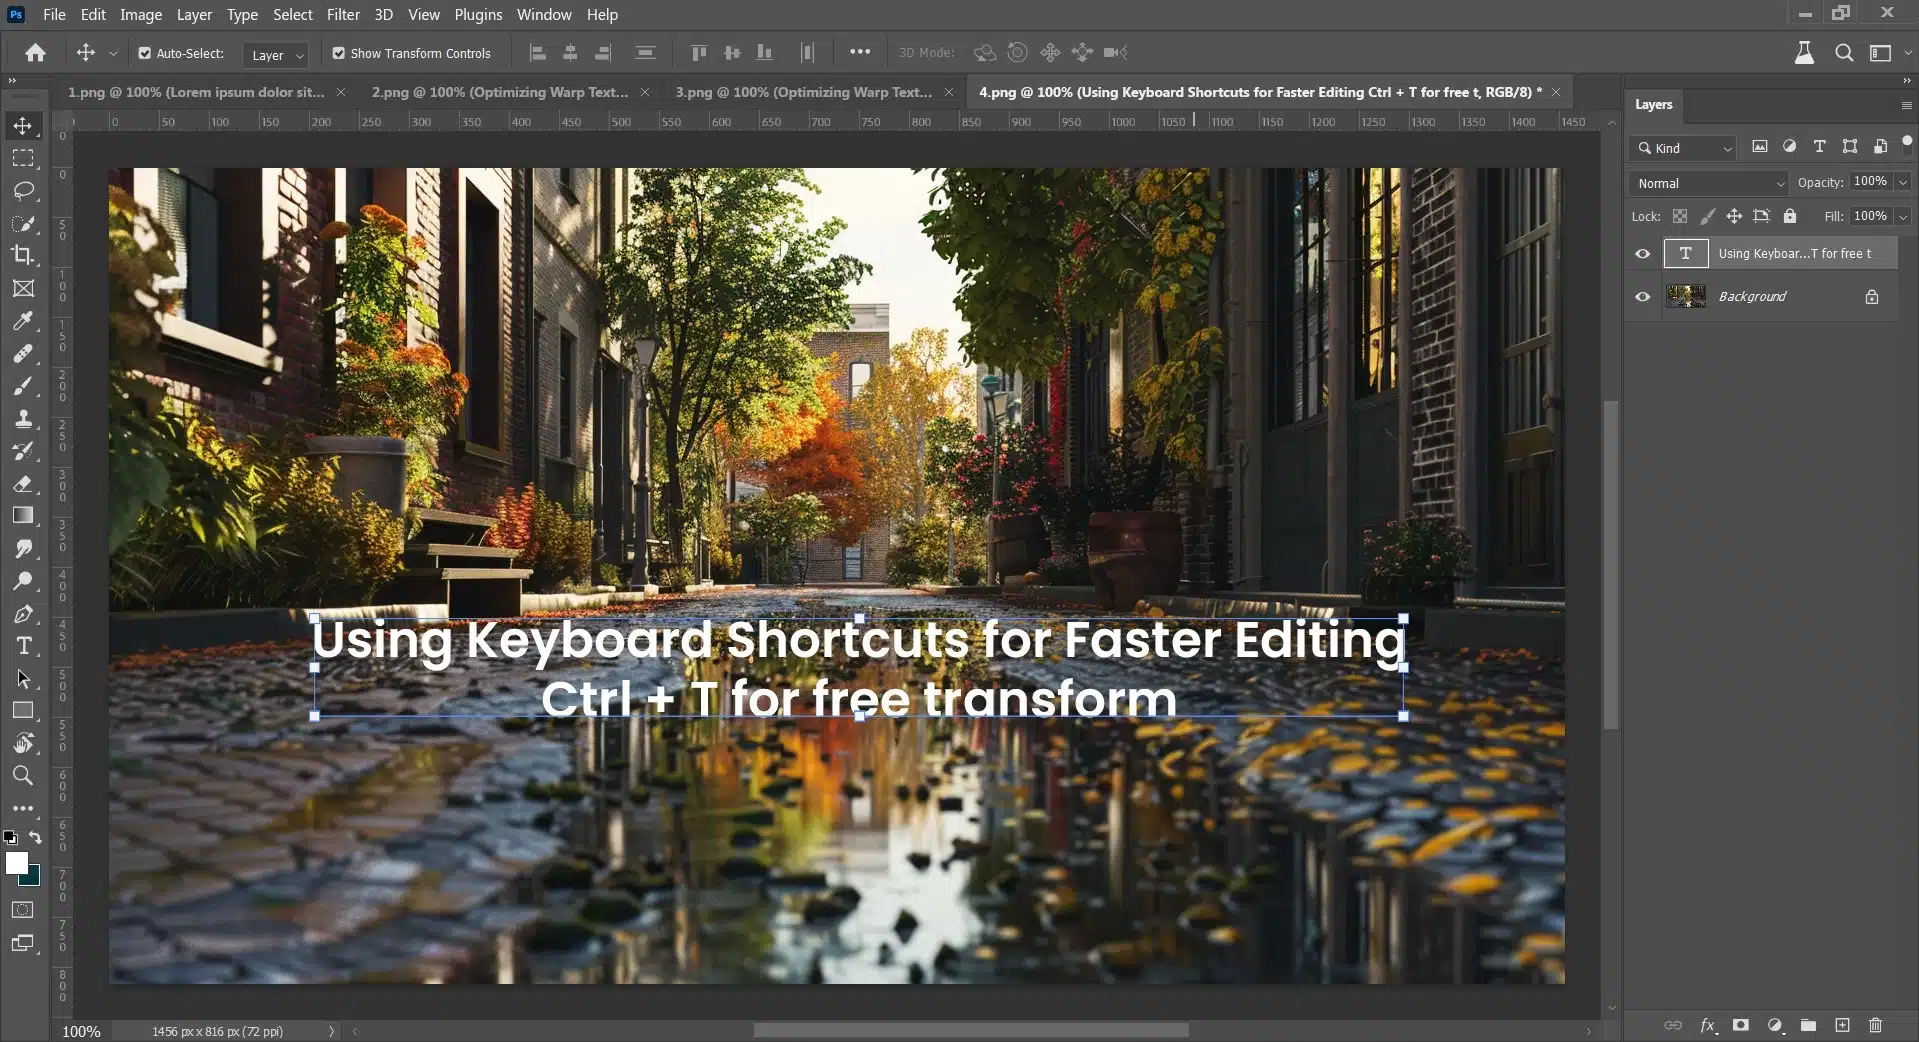 Screenshot of graphic design software displaying the use of text "Using Keyboard Shortcuts for Faster Editing Ctrl + T for free transform" over an image of a picturesque autumn street scene with reflections in puddles.